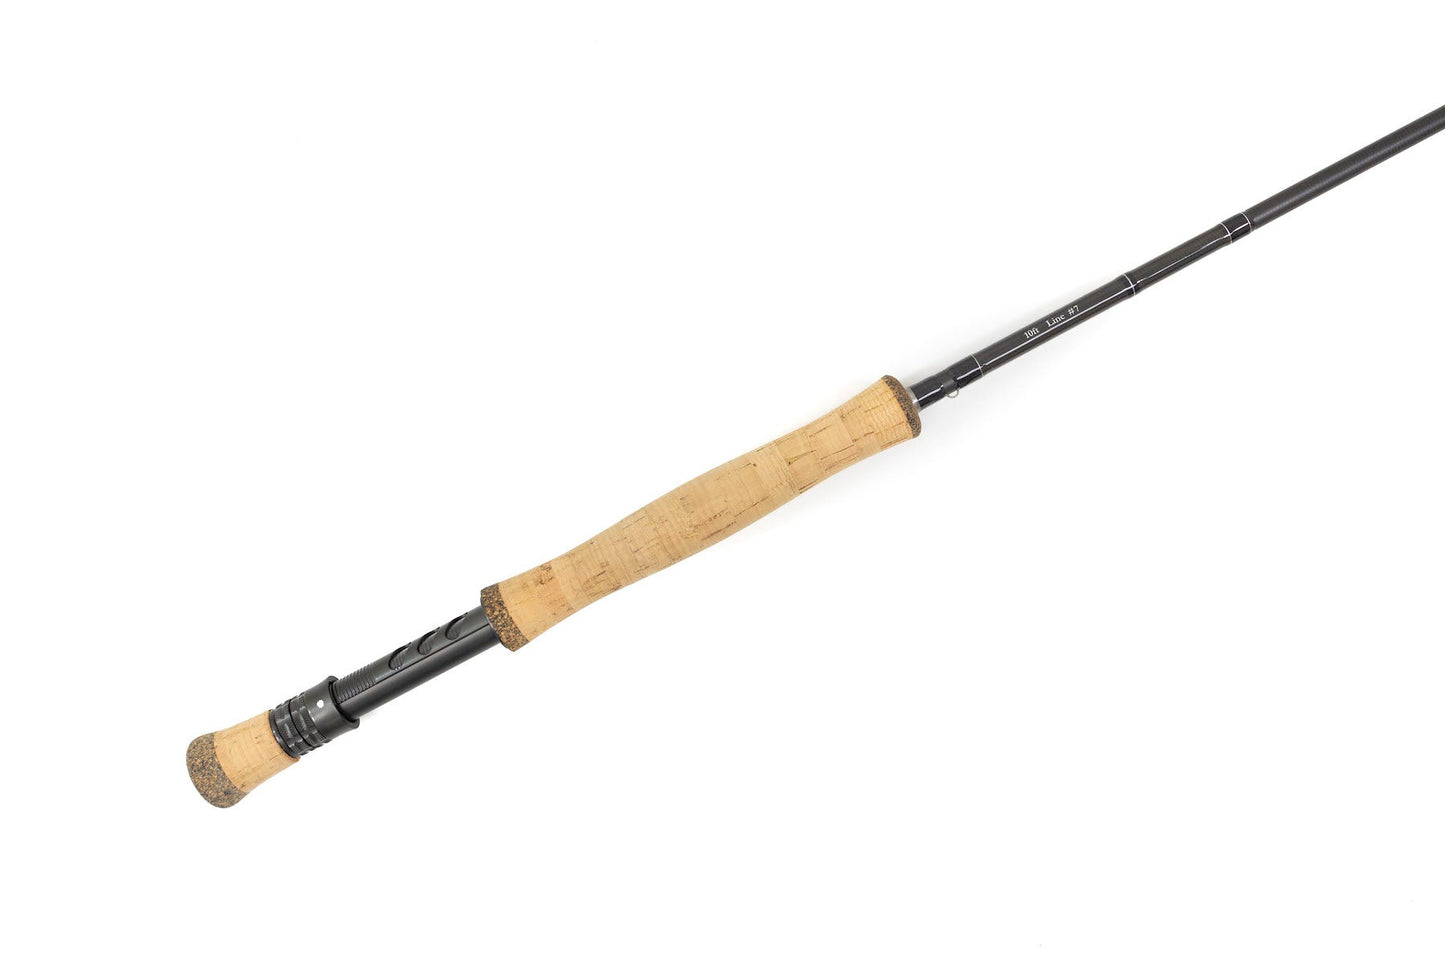 Spectre® RMX Fly Rods by Snowbee USA